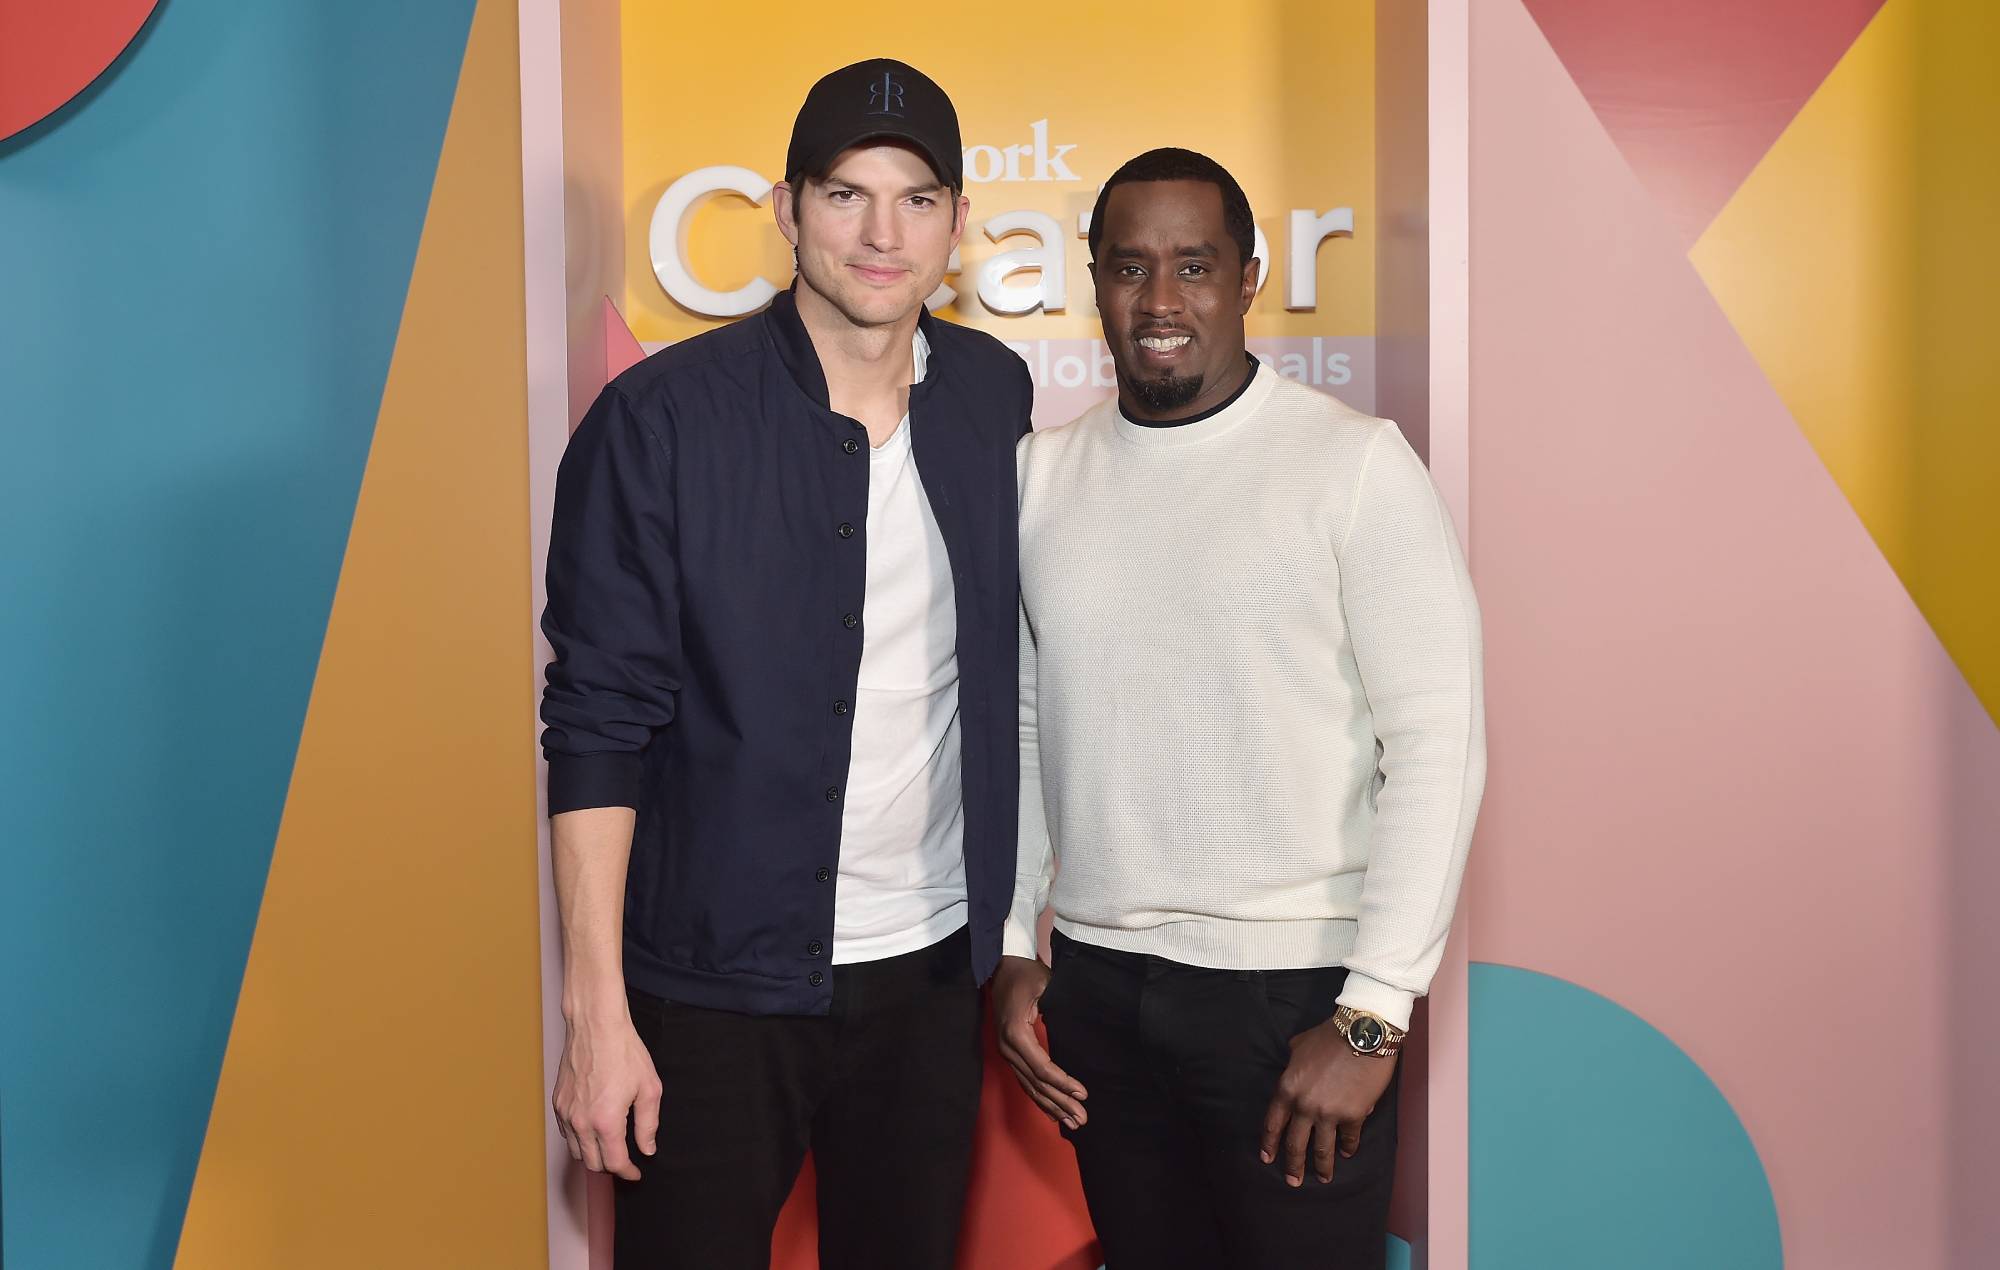 Ashton Kutcher says there’s “a lot I can’t tell” about Diddy in resurfaced interview after home raid